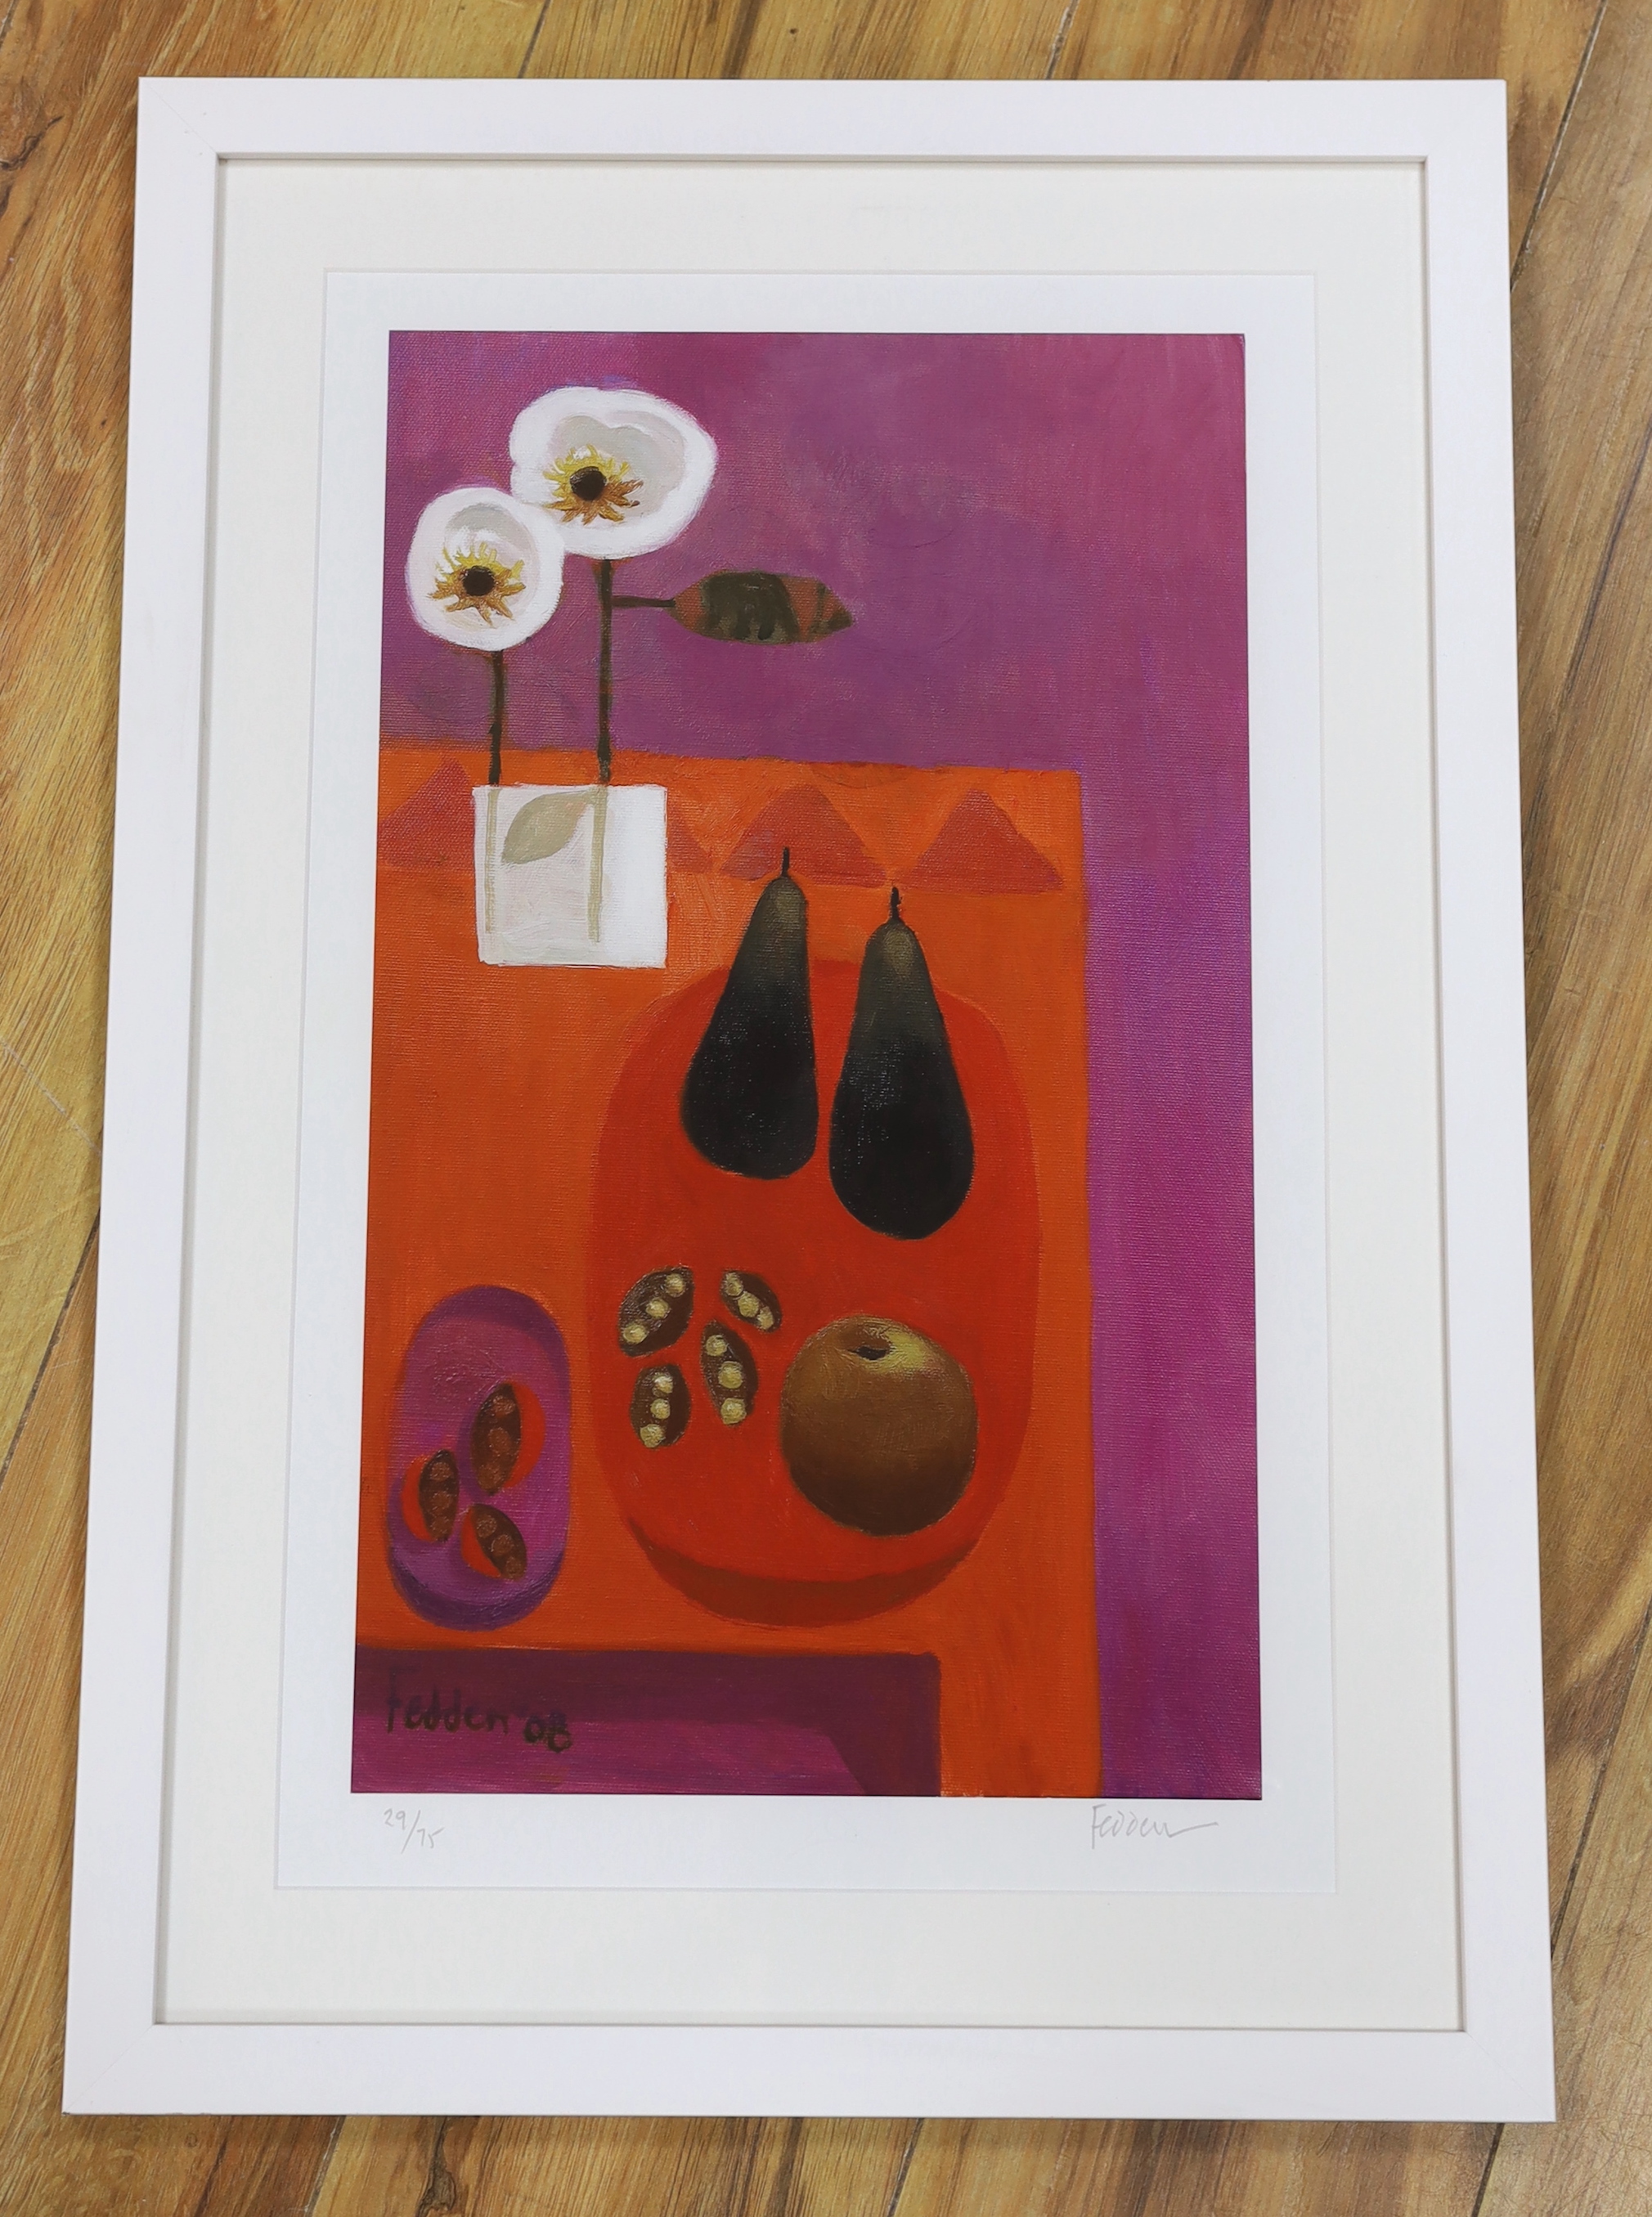 Mary Fedden (1915-2012), giclée print, 'Two Pears', limited edition 29/75, signed in pencil, 49 x 31cm